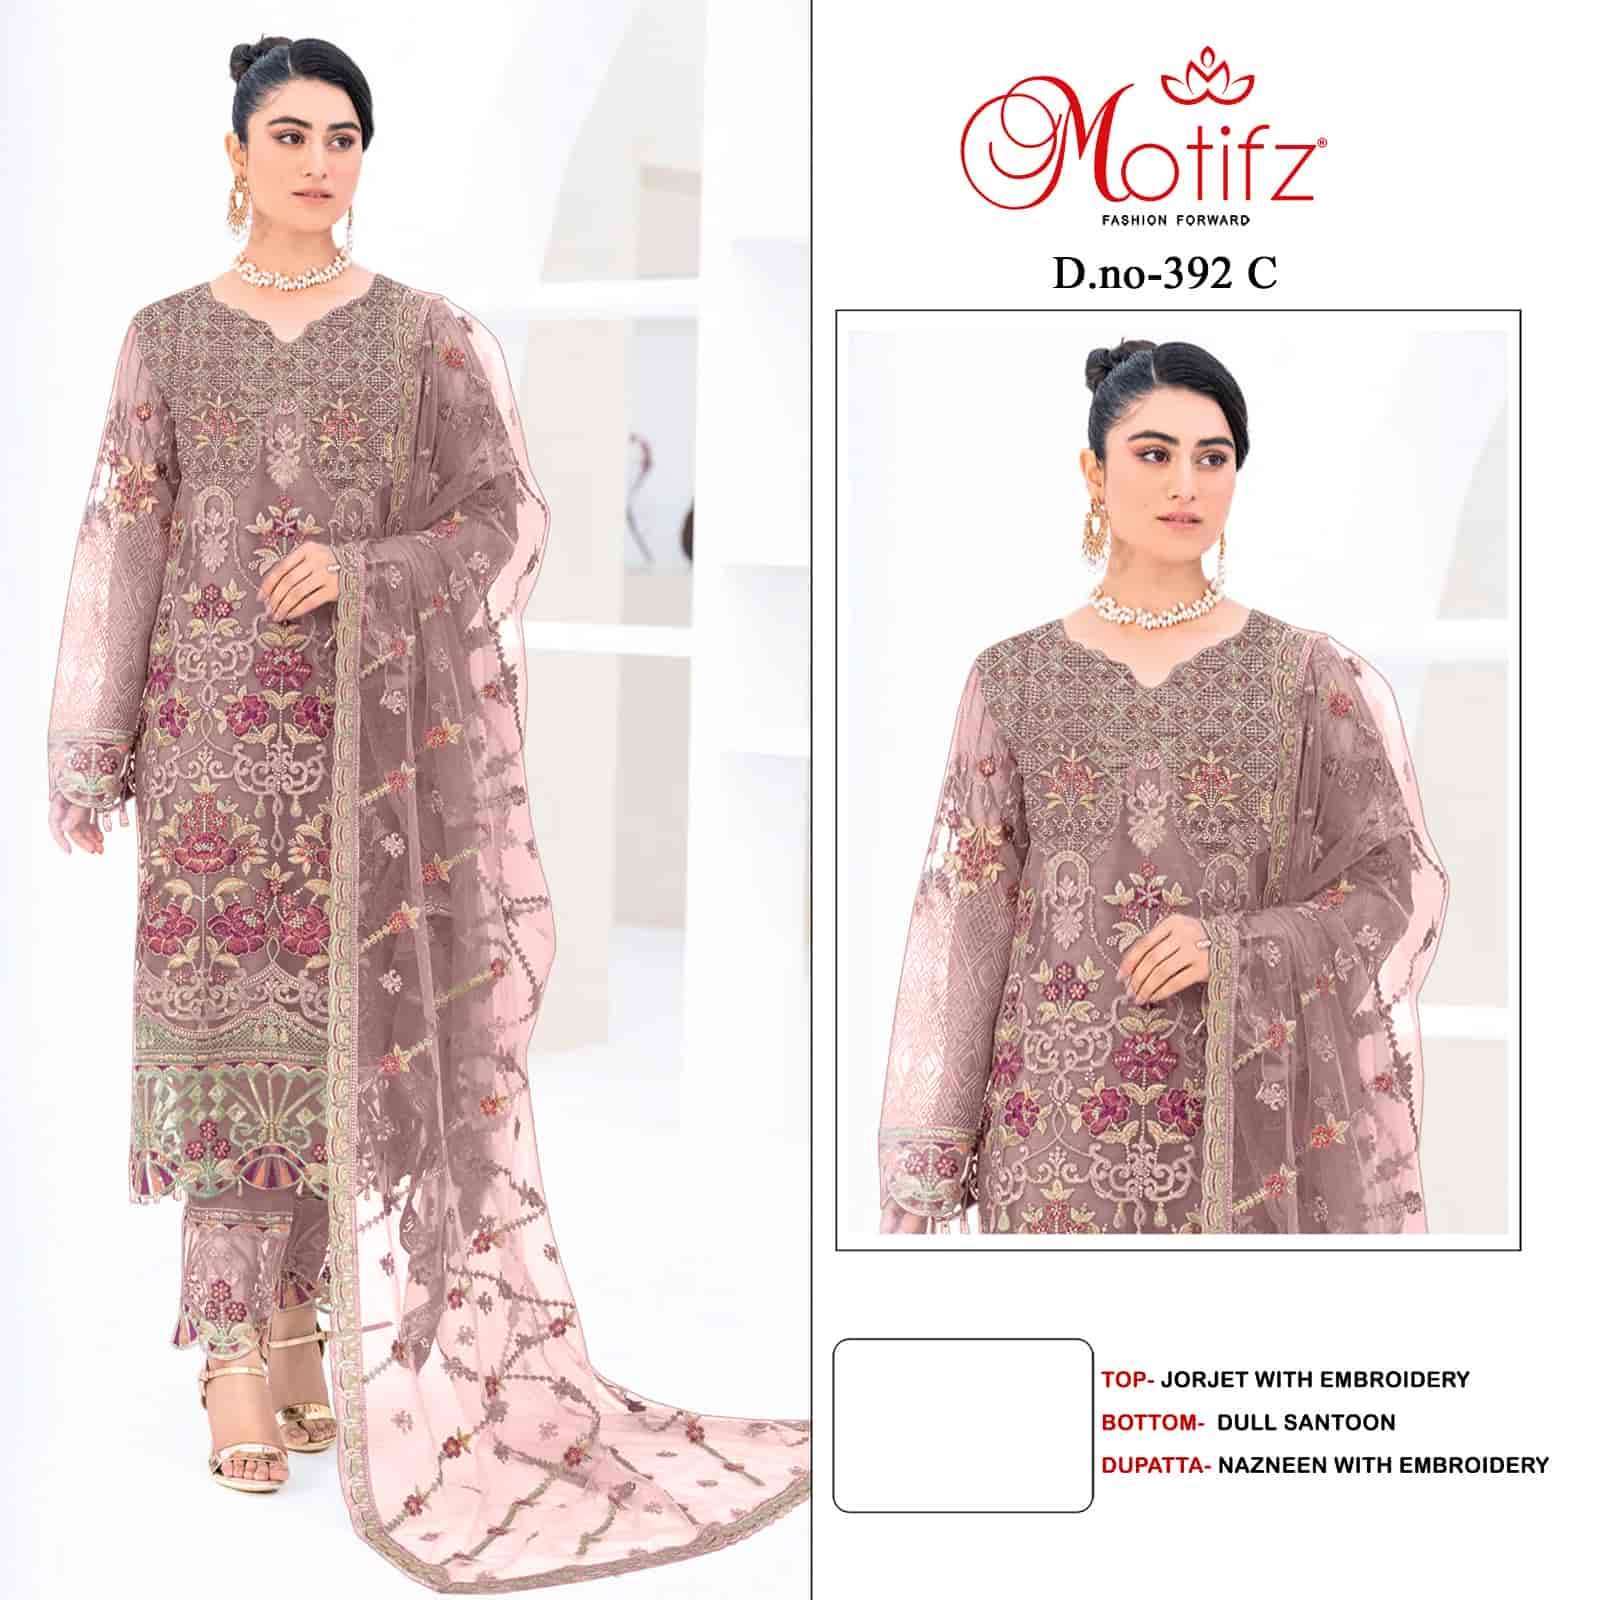 Motifz 392 COLOUR gEORGETTE WITH EMBROIDERY WORK DESIGNER PA...